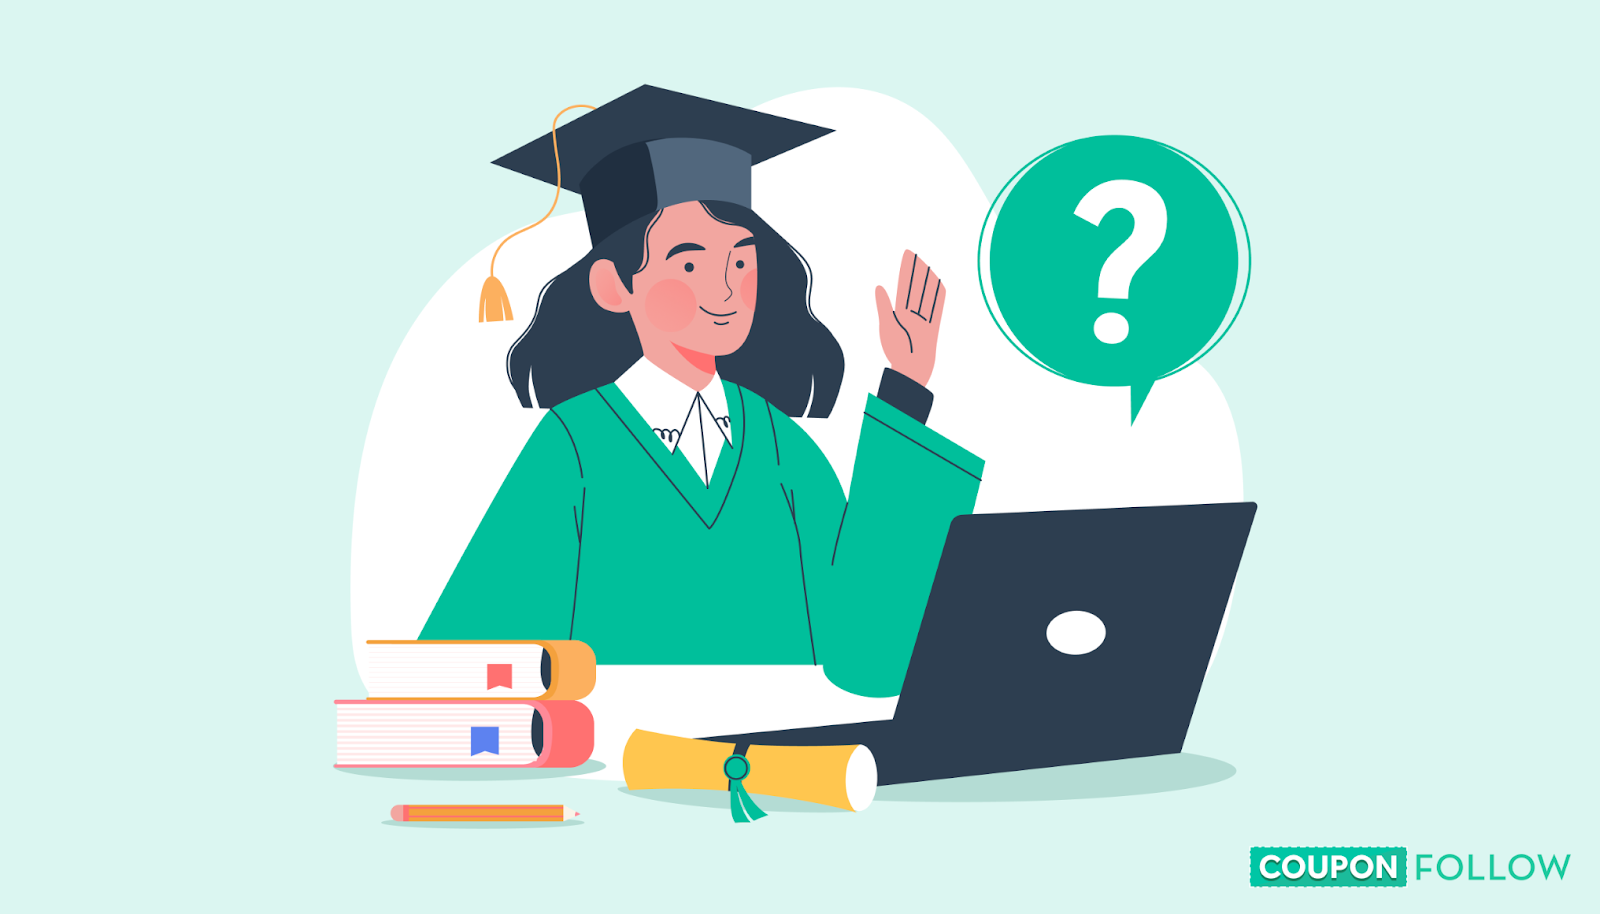 Scholarship frequently asked questions